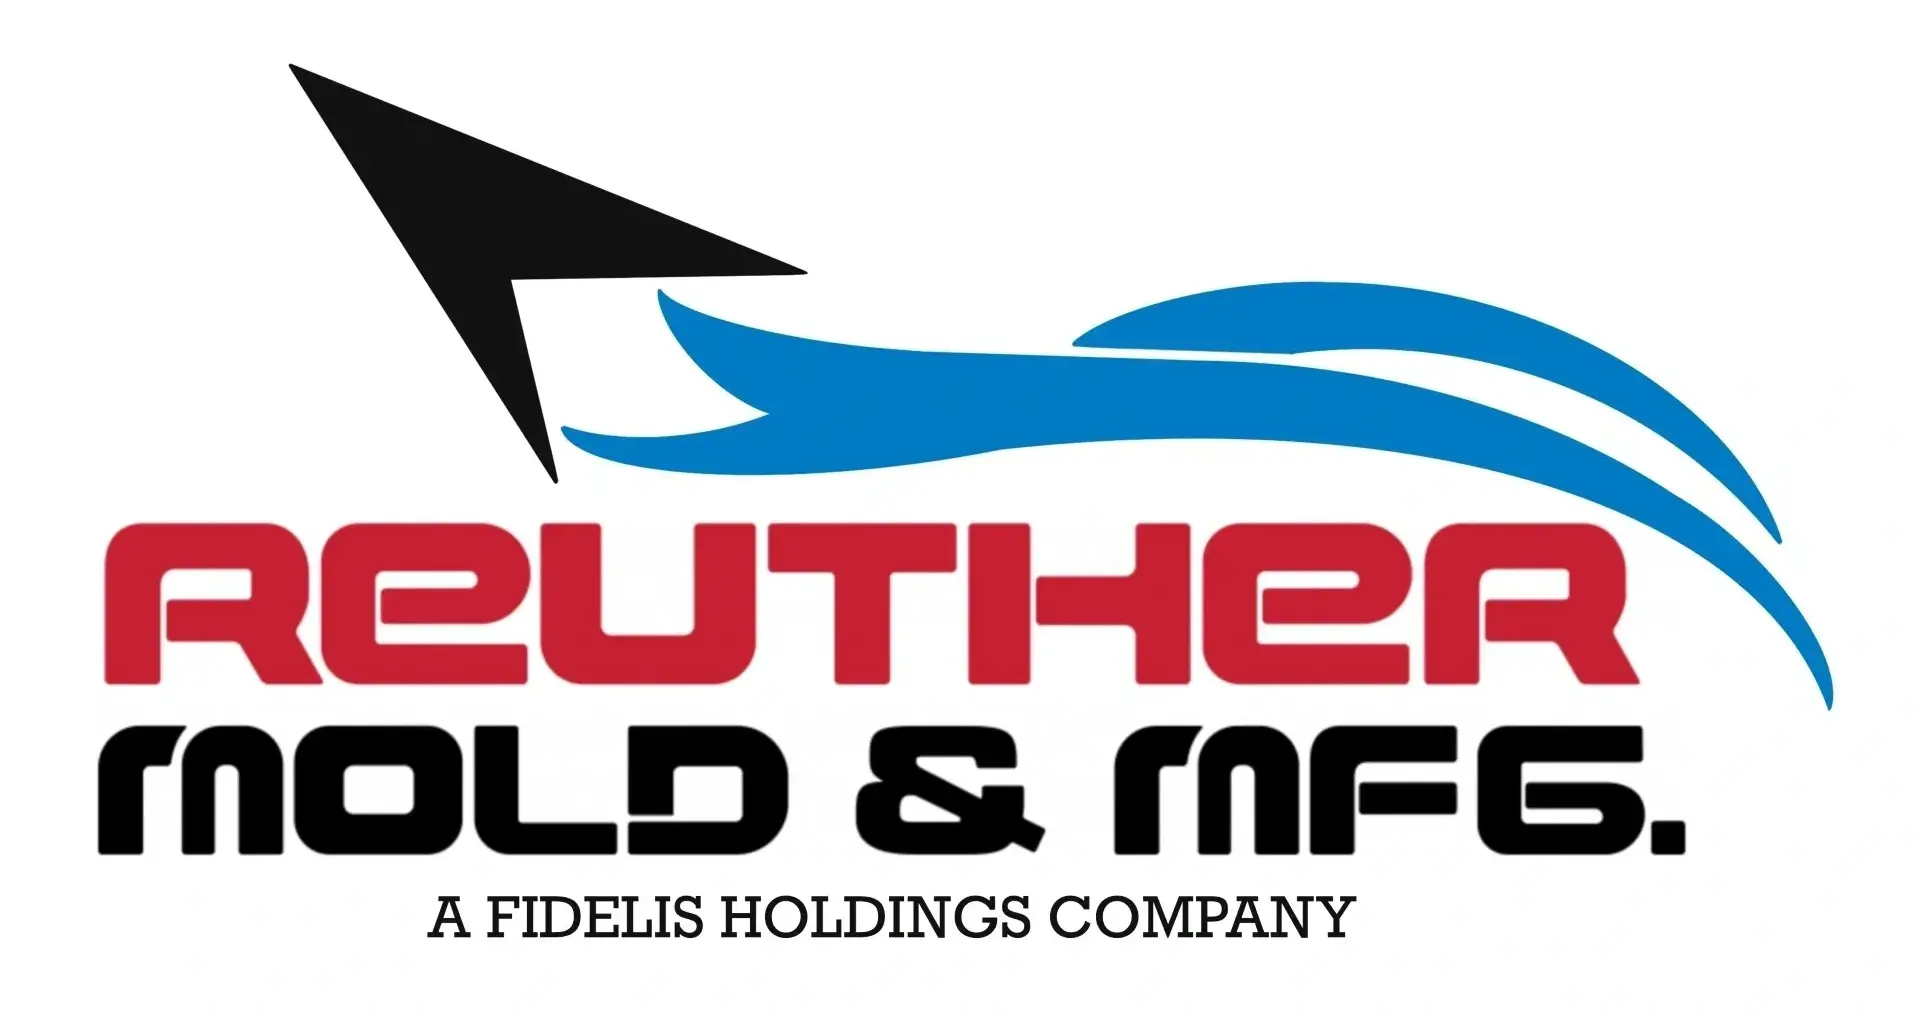 A logo for southern gold and mfg.